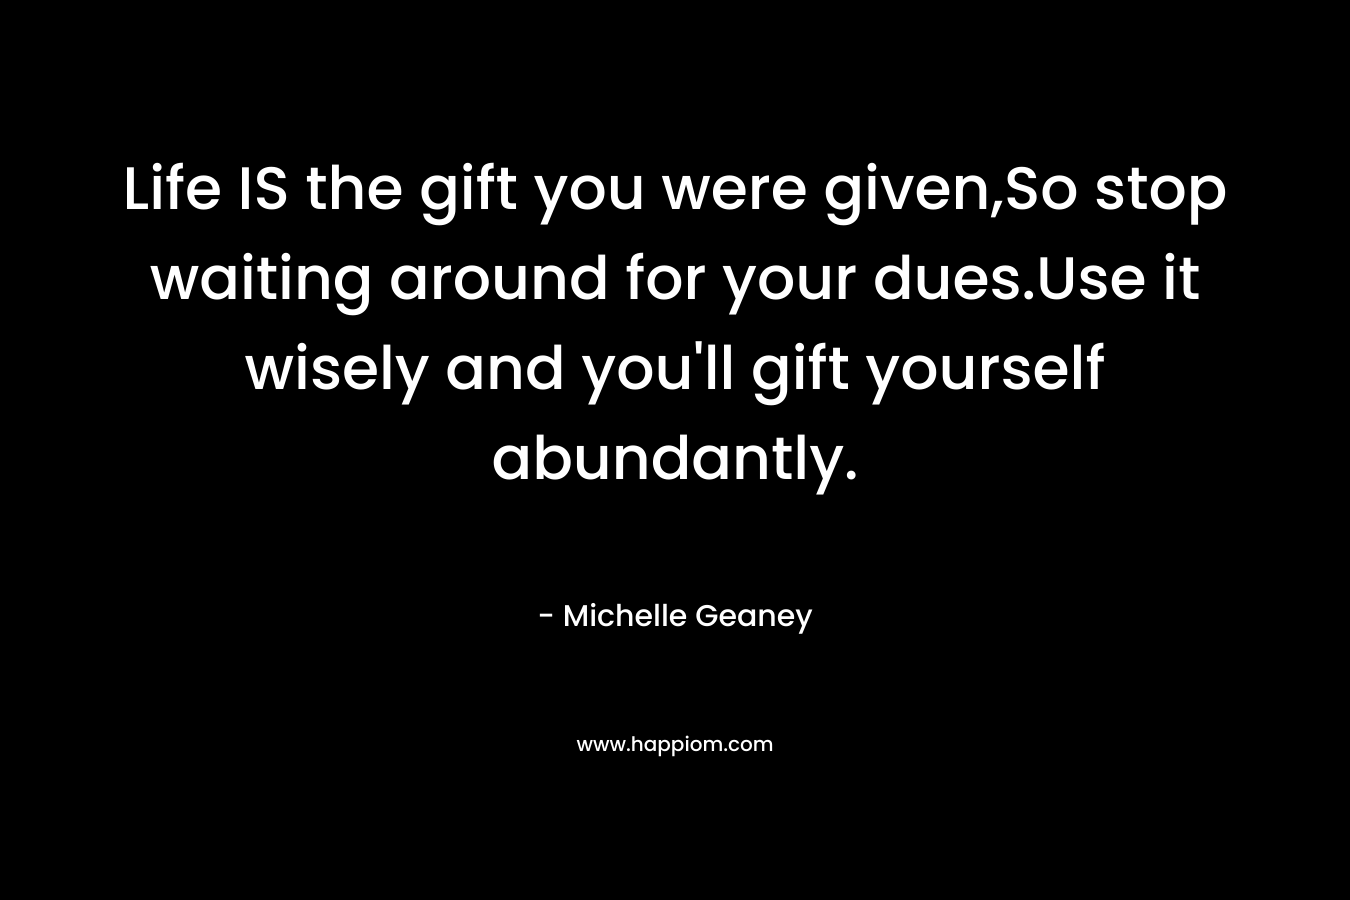 Life IS the gift you were given,So stop waiting around for your dues.Use it wisely and you’ll gift yourself abundantly. – Michelle Geaney